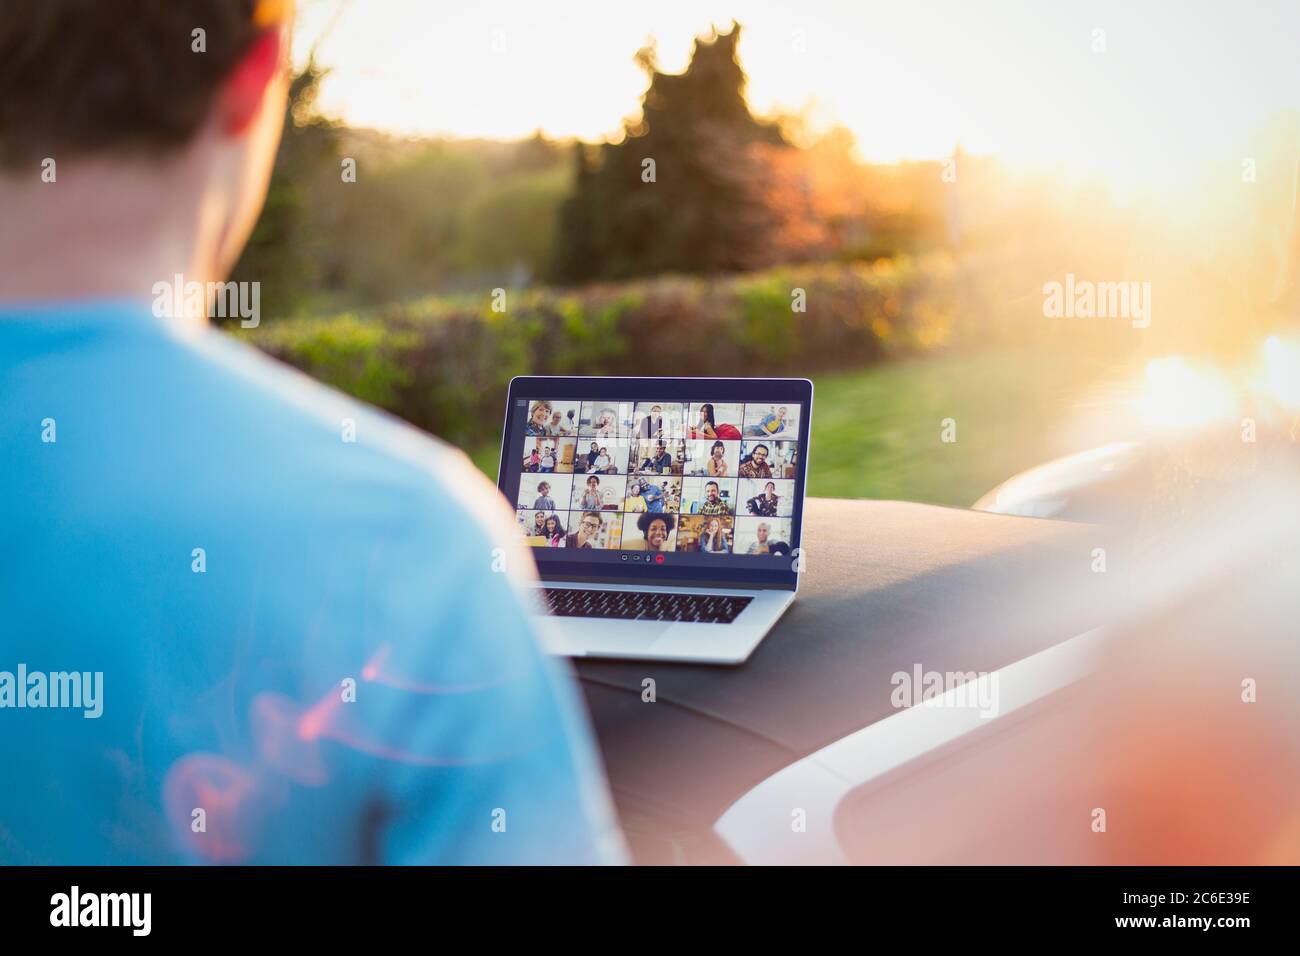 Man video chatting with friends on laptop screen on top of car Stock Photo